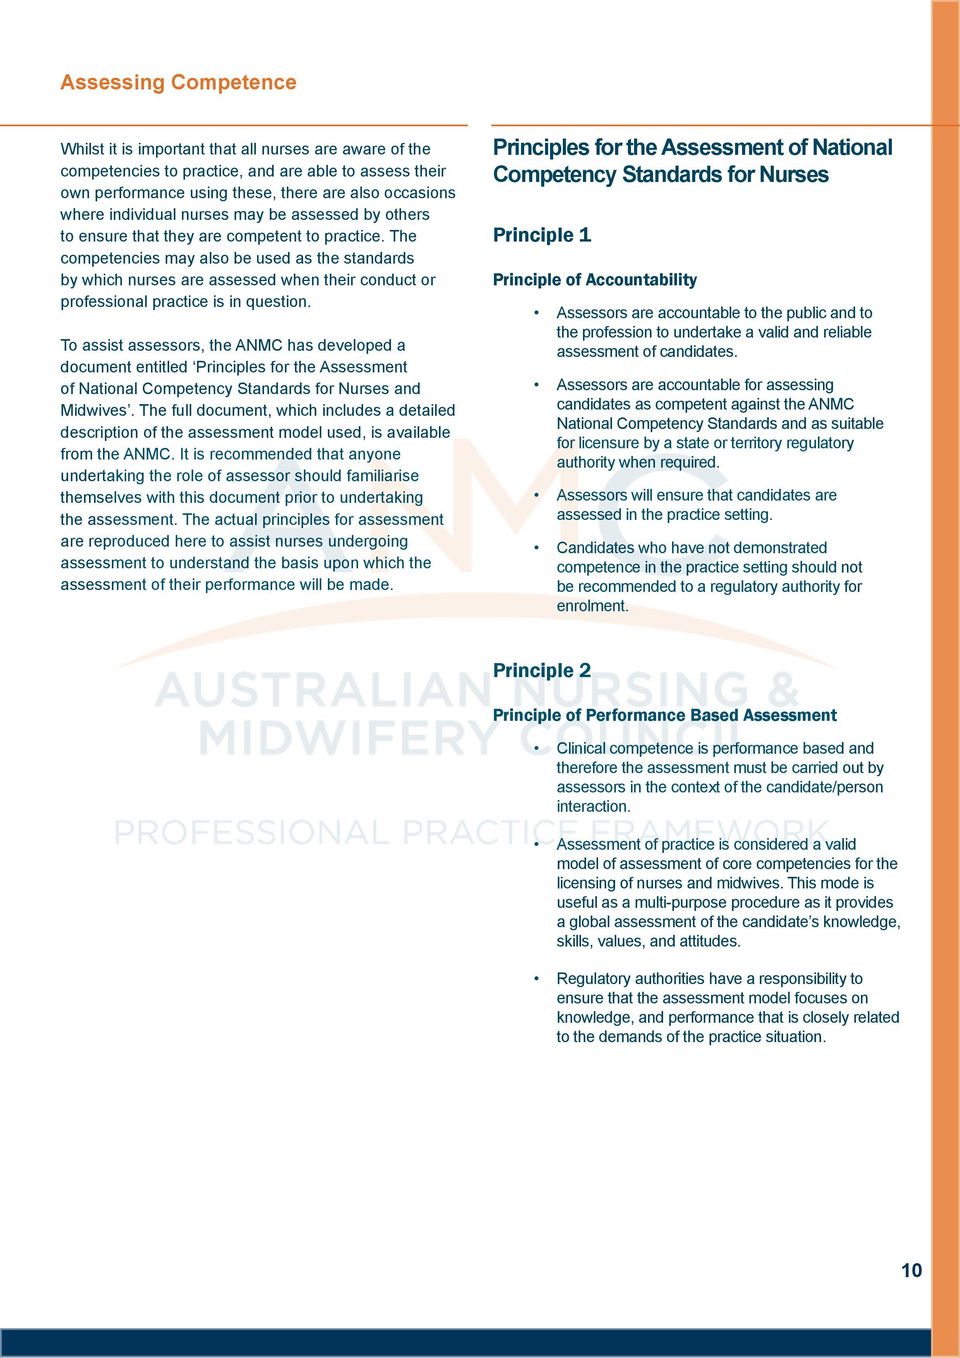 The competencies may also be used as the standards by which nurses are assessed when their conduct or professional practice is in question.